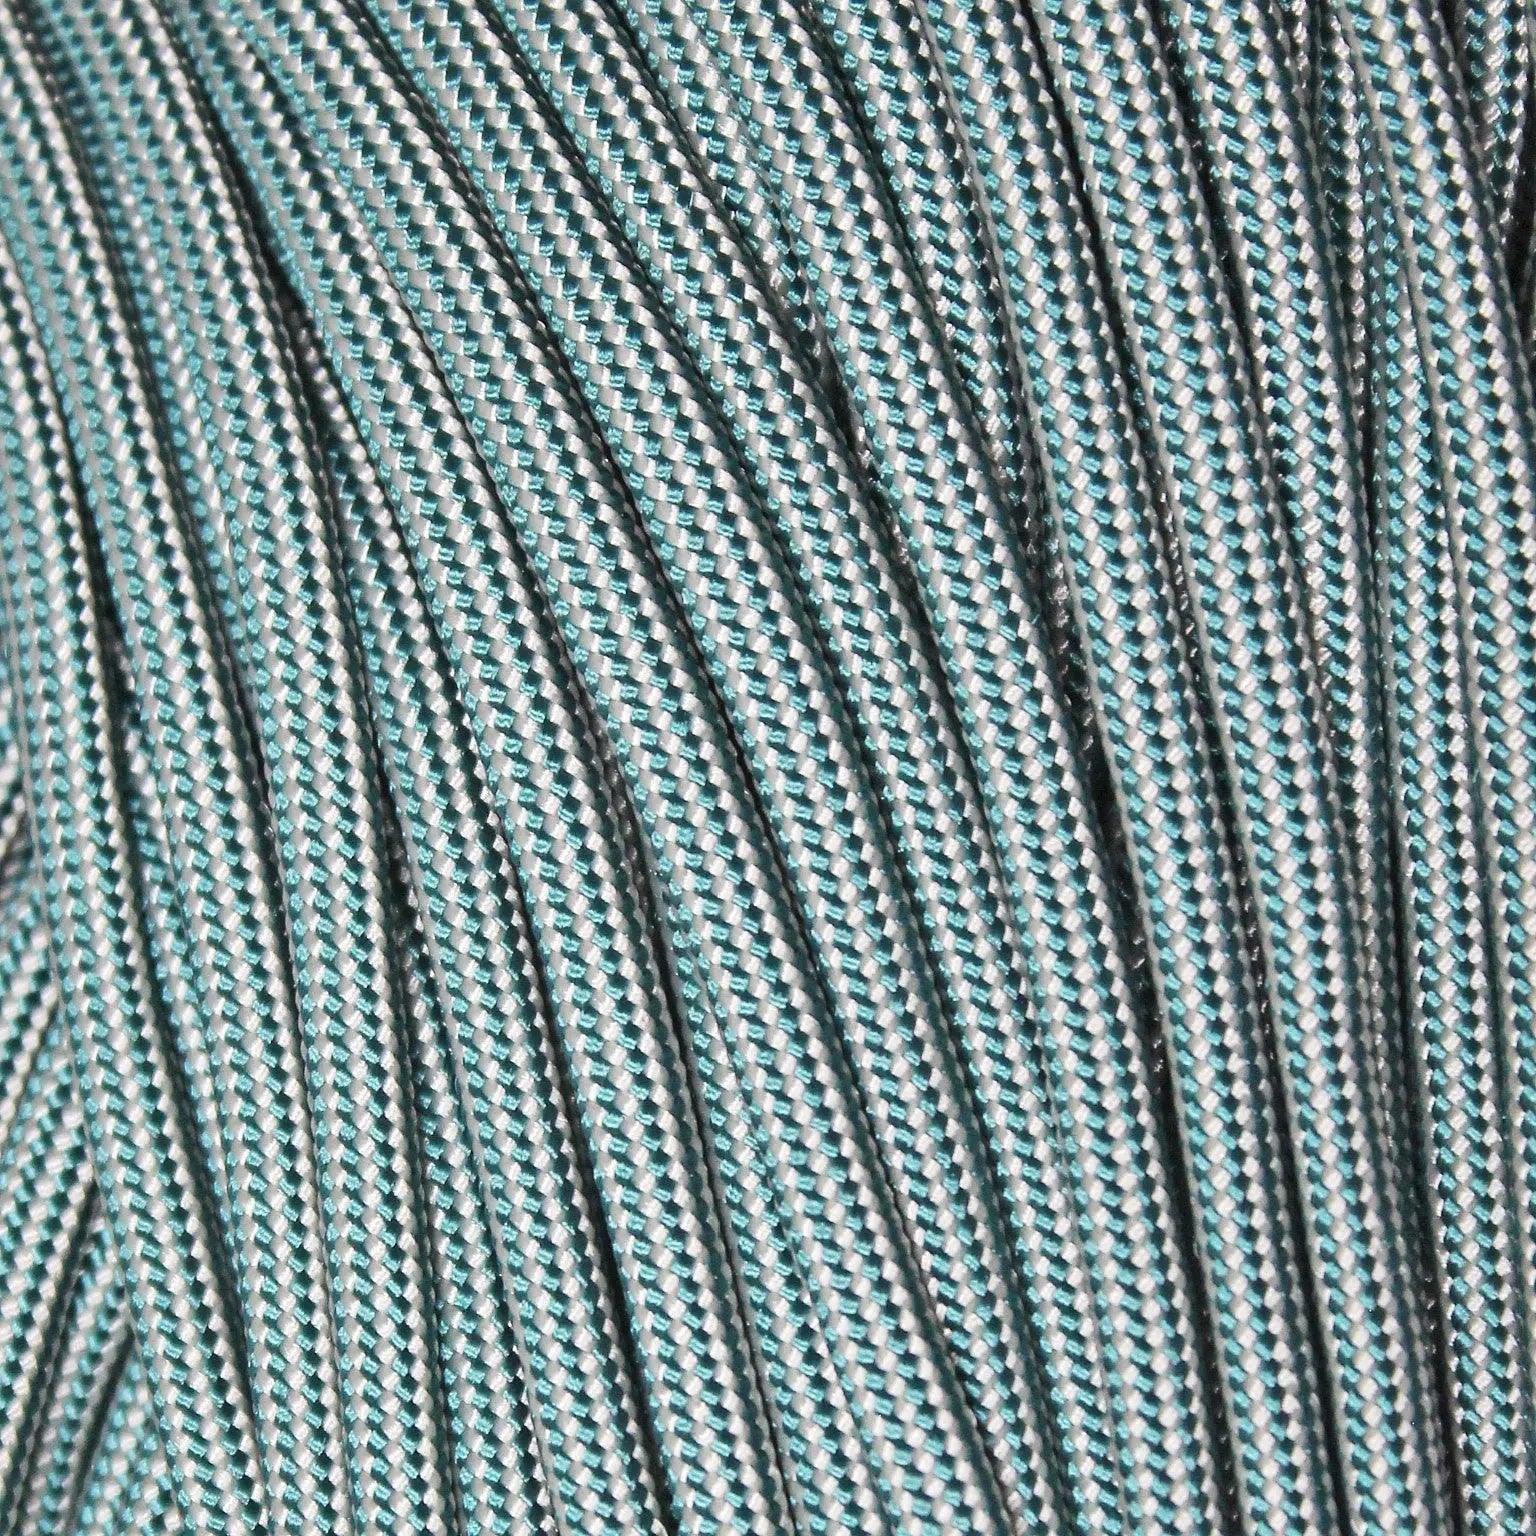 Cream and Teal Stripes 550 Paracord Made in the USA (100 FT.)  163- nylon/nylon paracord